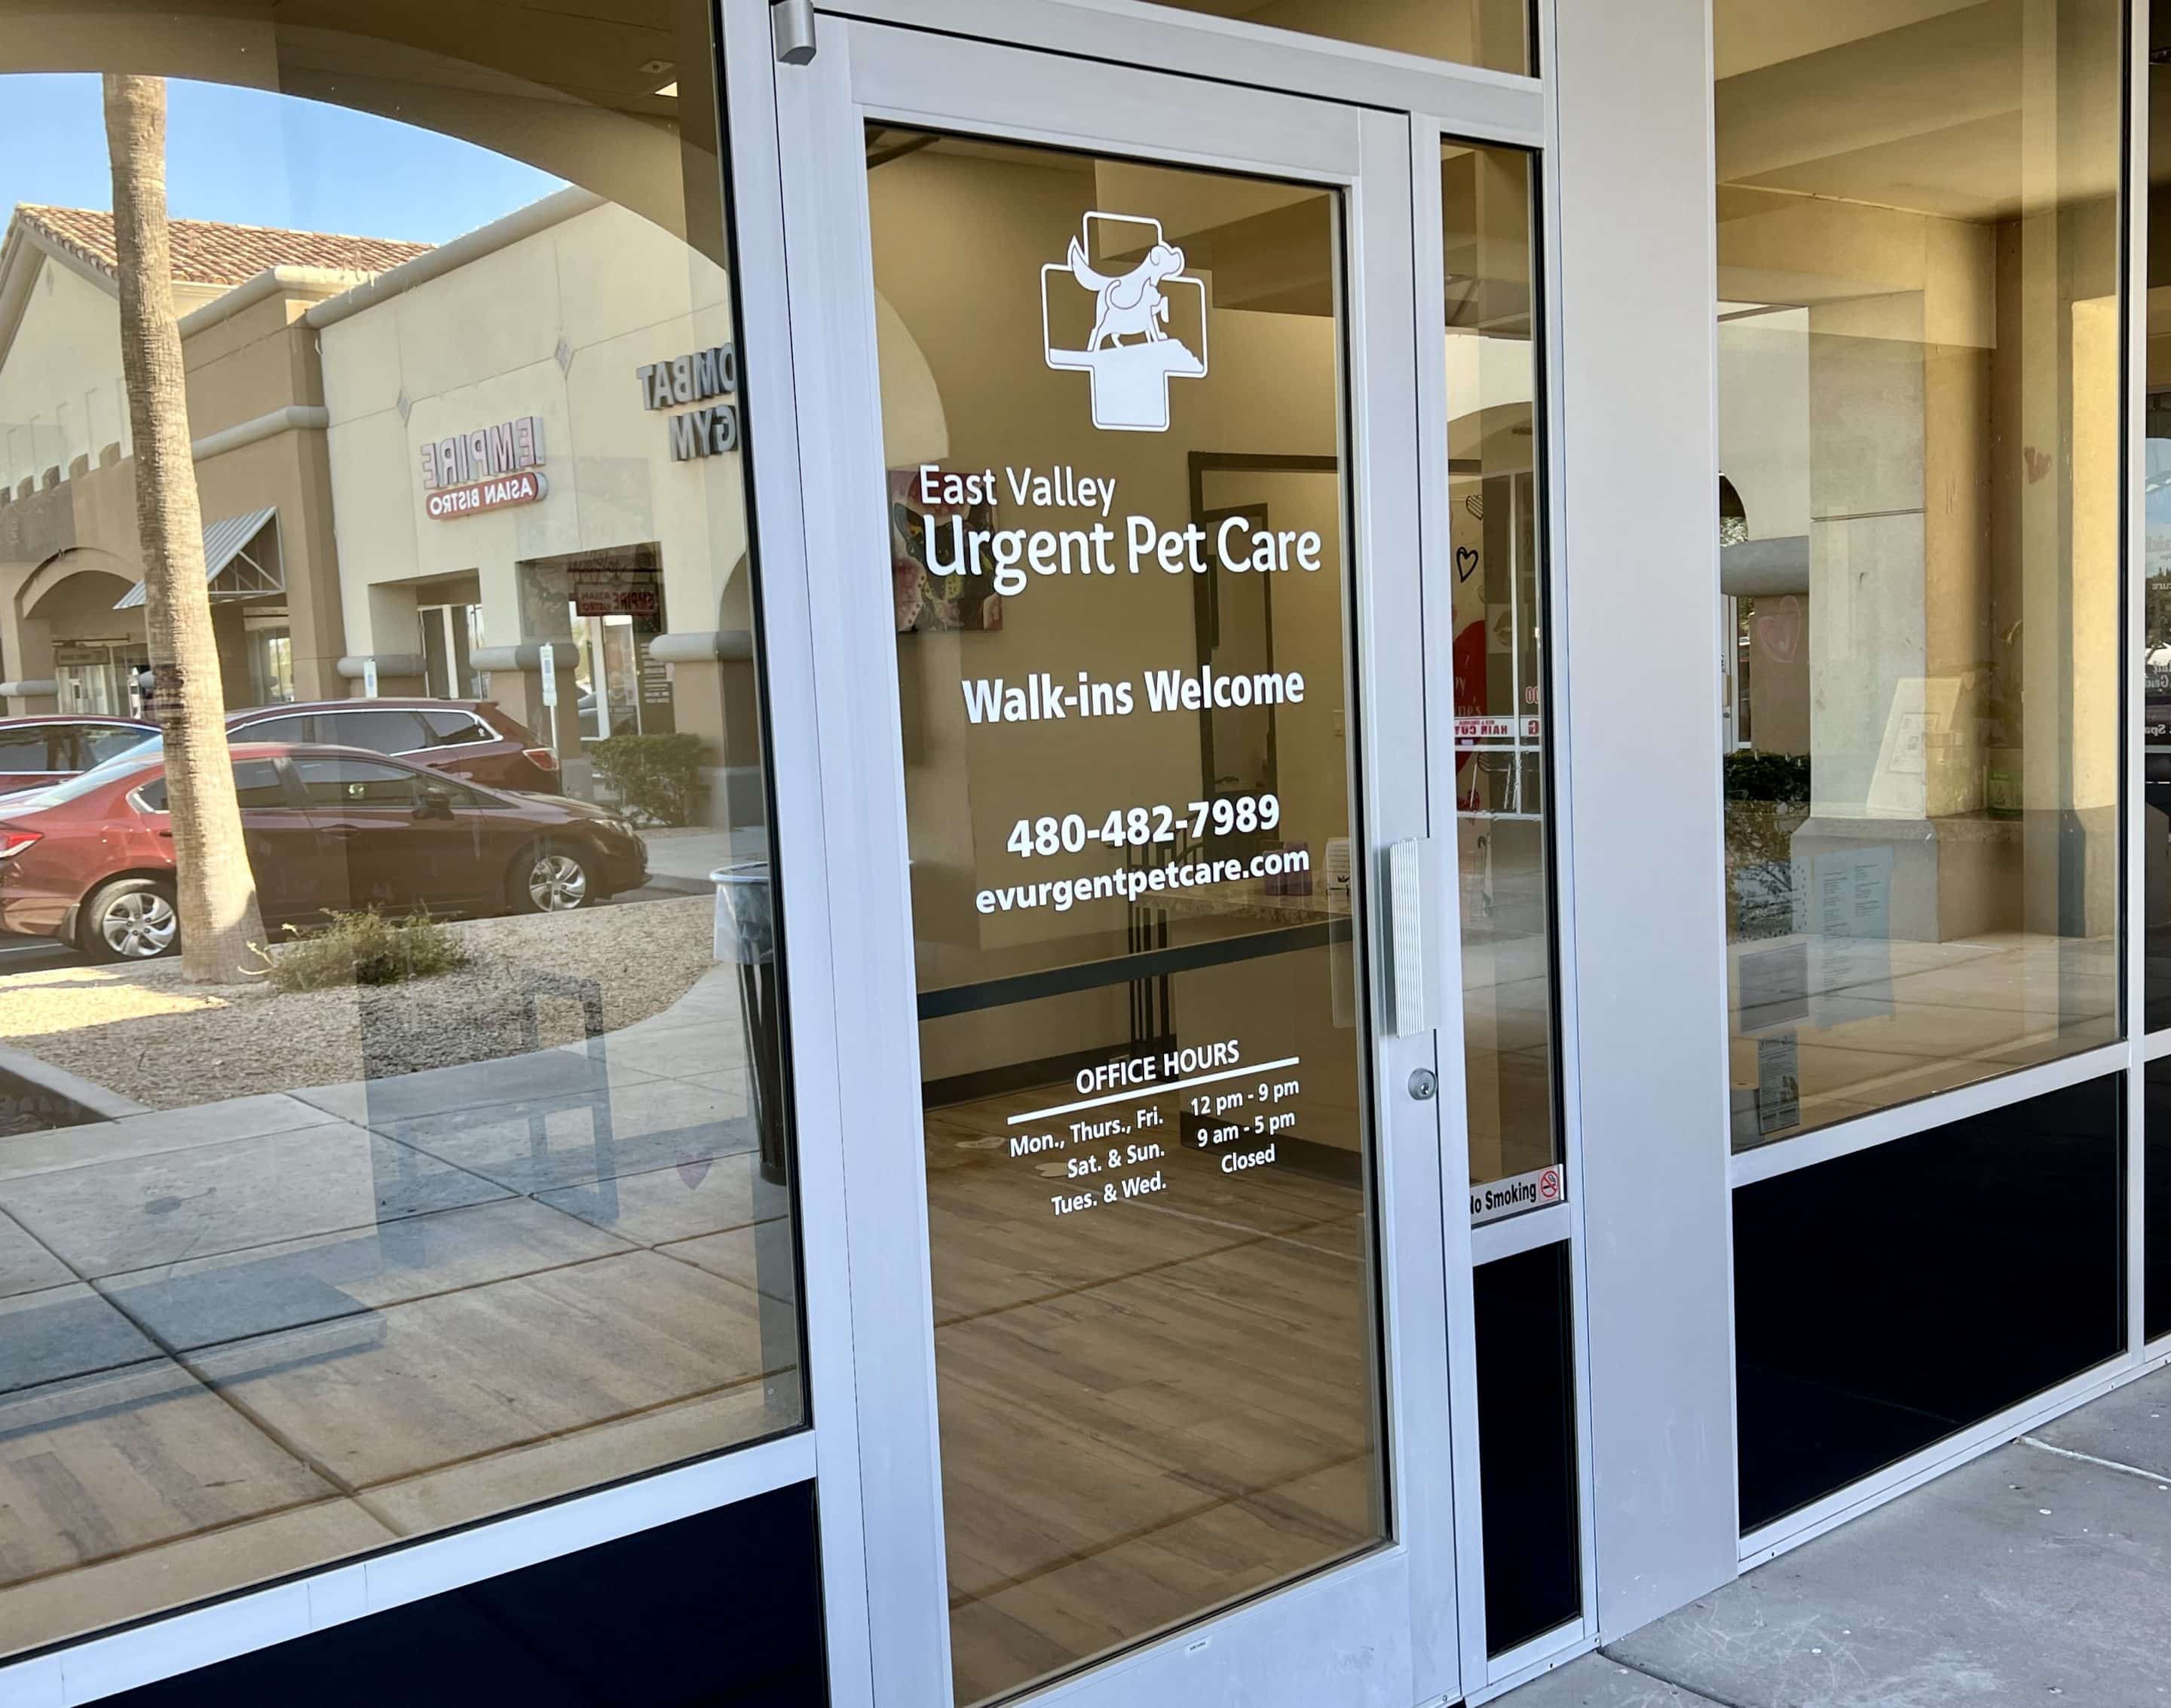 Emergency Pet Care located in Mesa, Arizona, at East Valley Urgent Pet Care